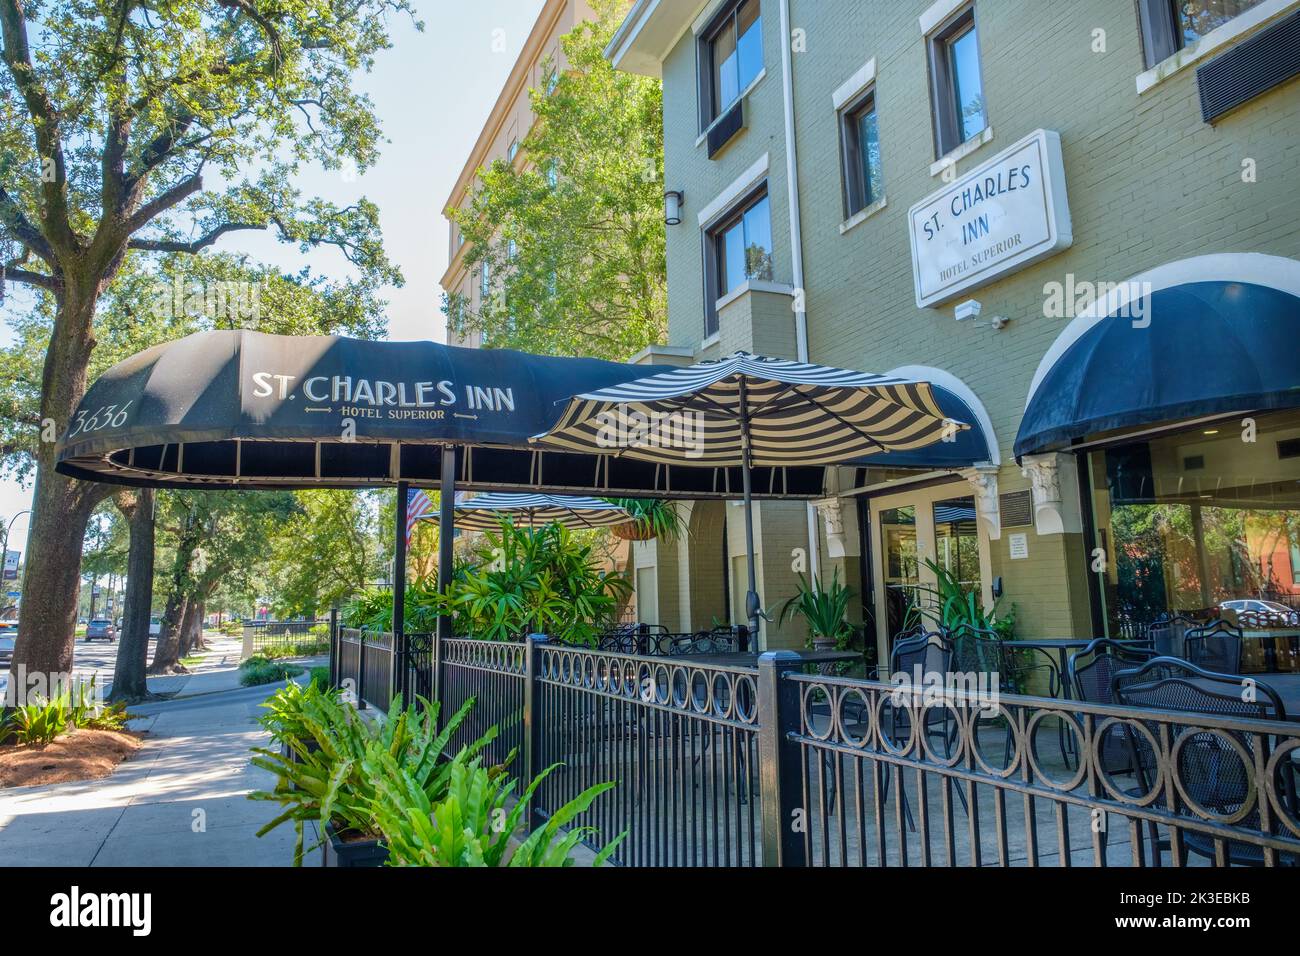 NEW ORLEANS, LA, USA - SEPTEMBER 14, 2022: Entrance to St. Charles Inn - Hotel Superior on St. Charles Avenue in Uptown New Orleans Stock Photo